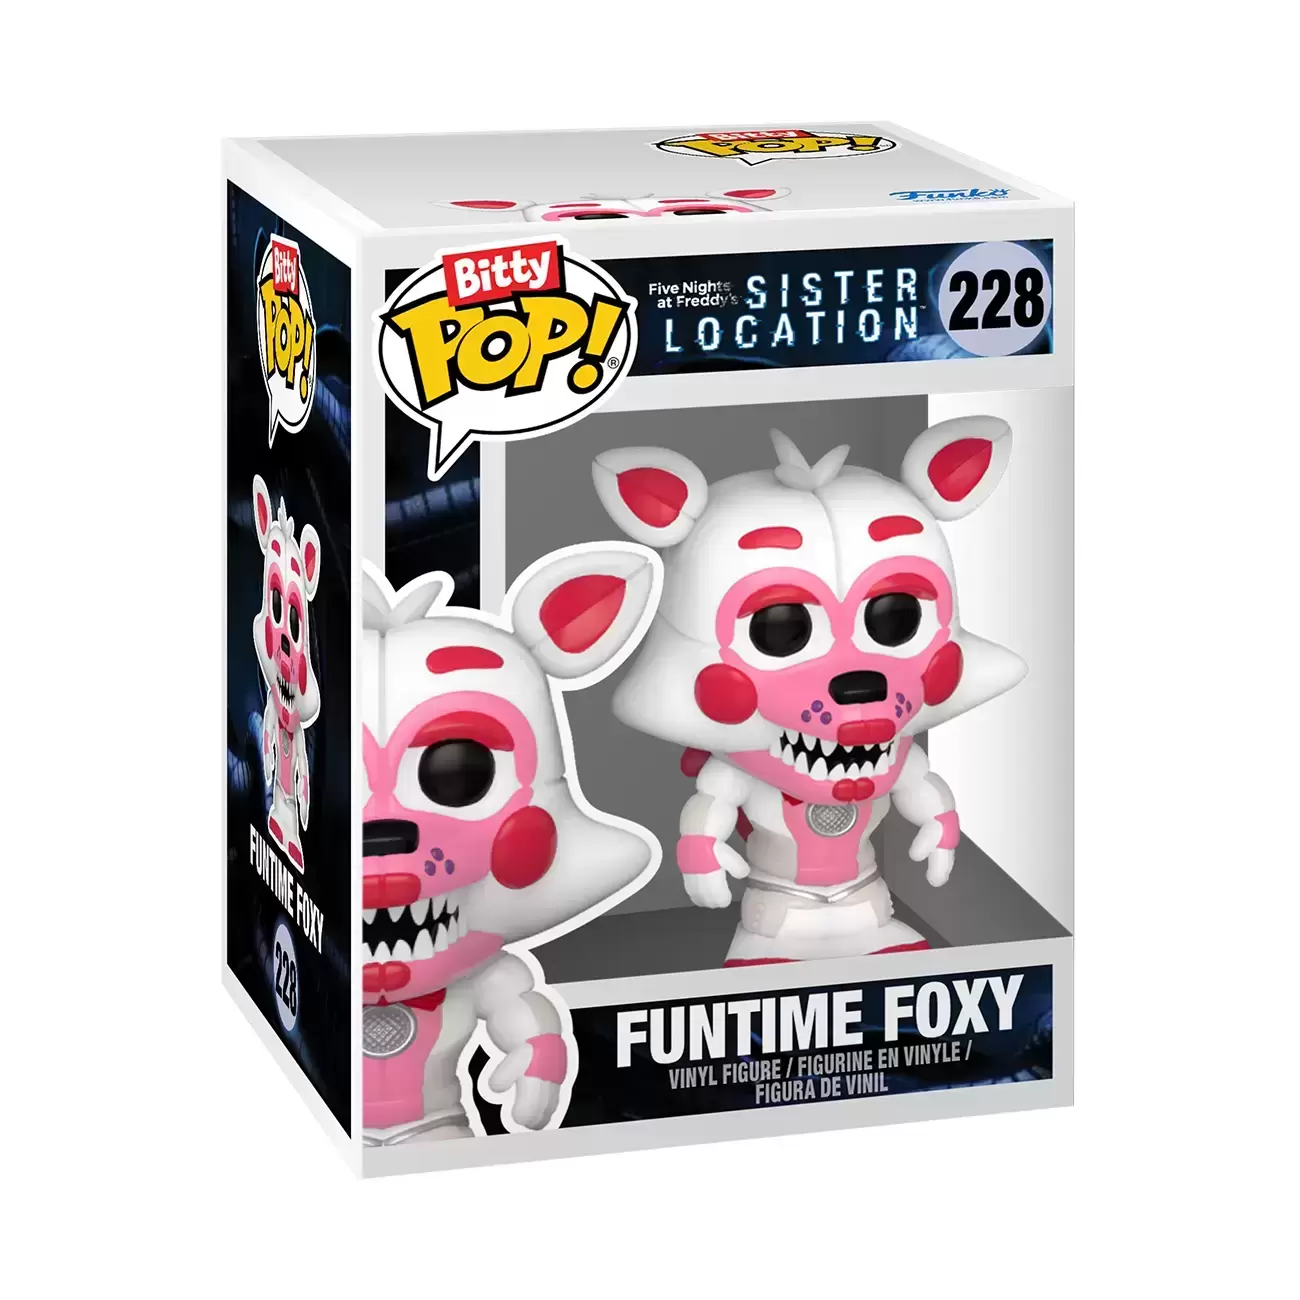 Bitty Pop! Five Nights at Freddy's 4-Pack Series 4